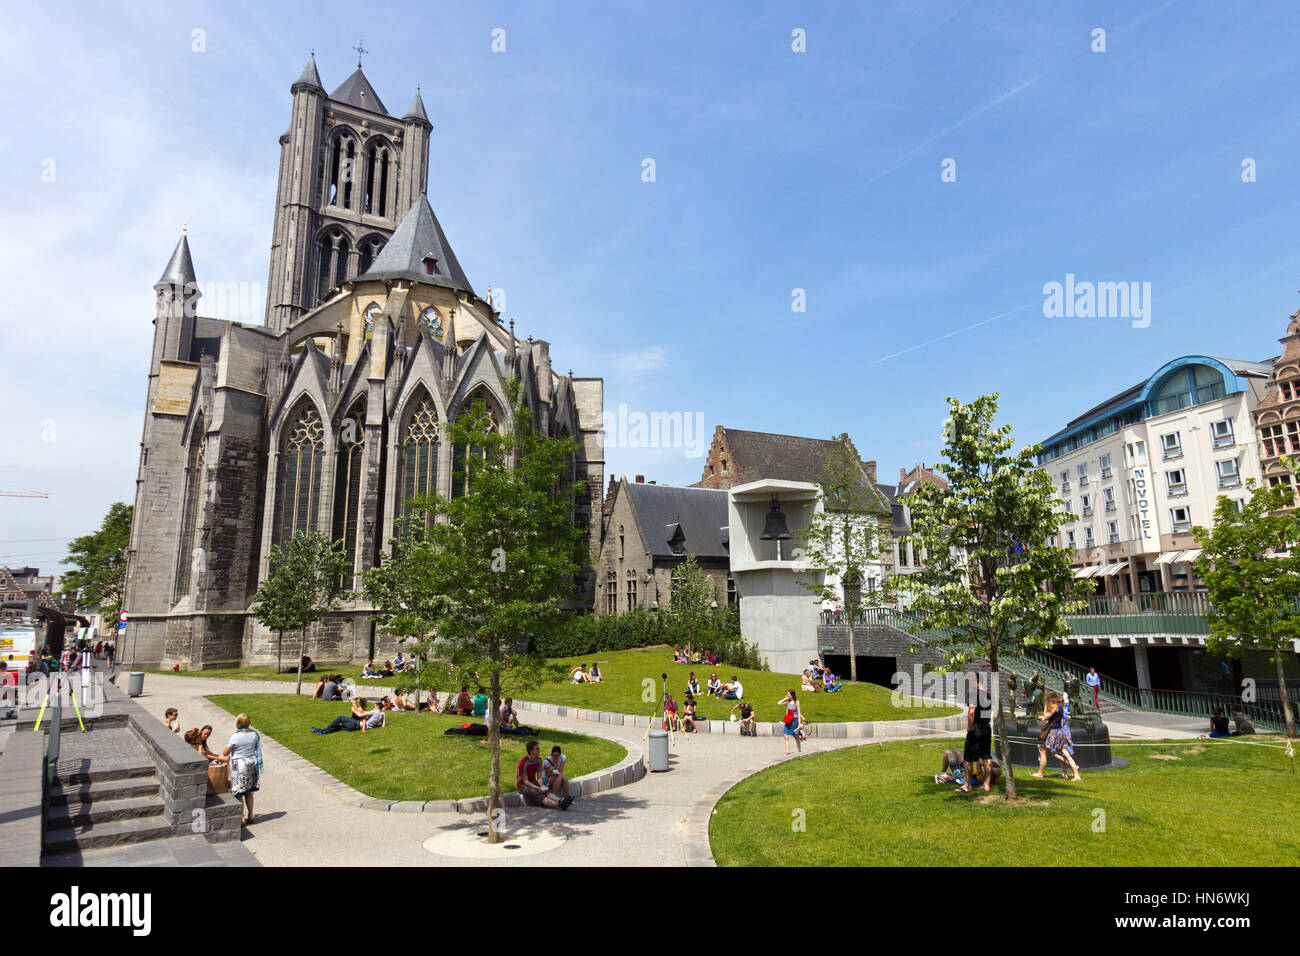 GHENT - JUN 18: View on the St Bavos Cathedral of Gent on June 18, 2013 in Ghent, Belgium. The city is a municipality located in the Flemish region of Stock Photo